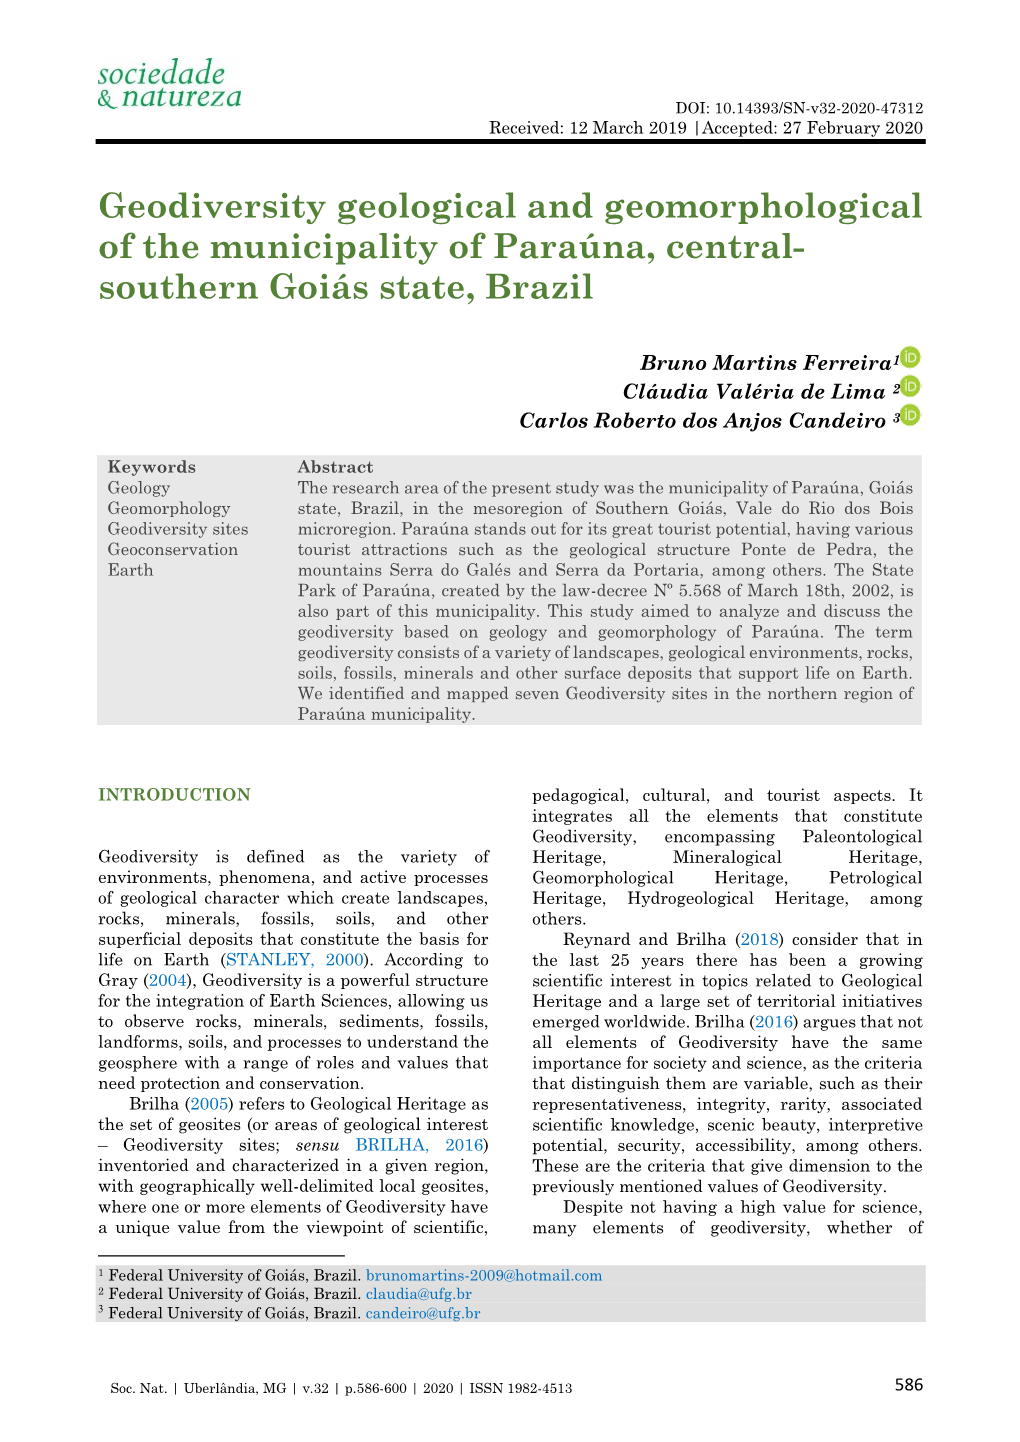 Geodiversity Geological and Geomorphological of the Municipality of Paraúna, Central- Southern Goiás State, Brazil